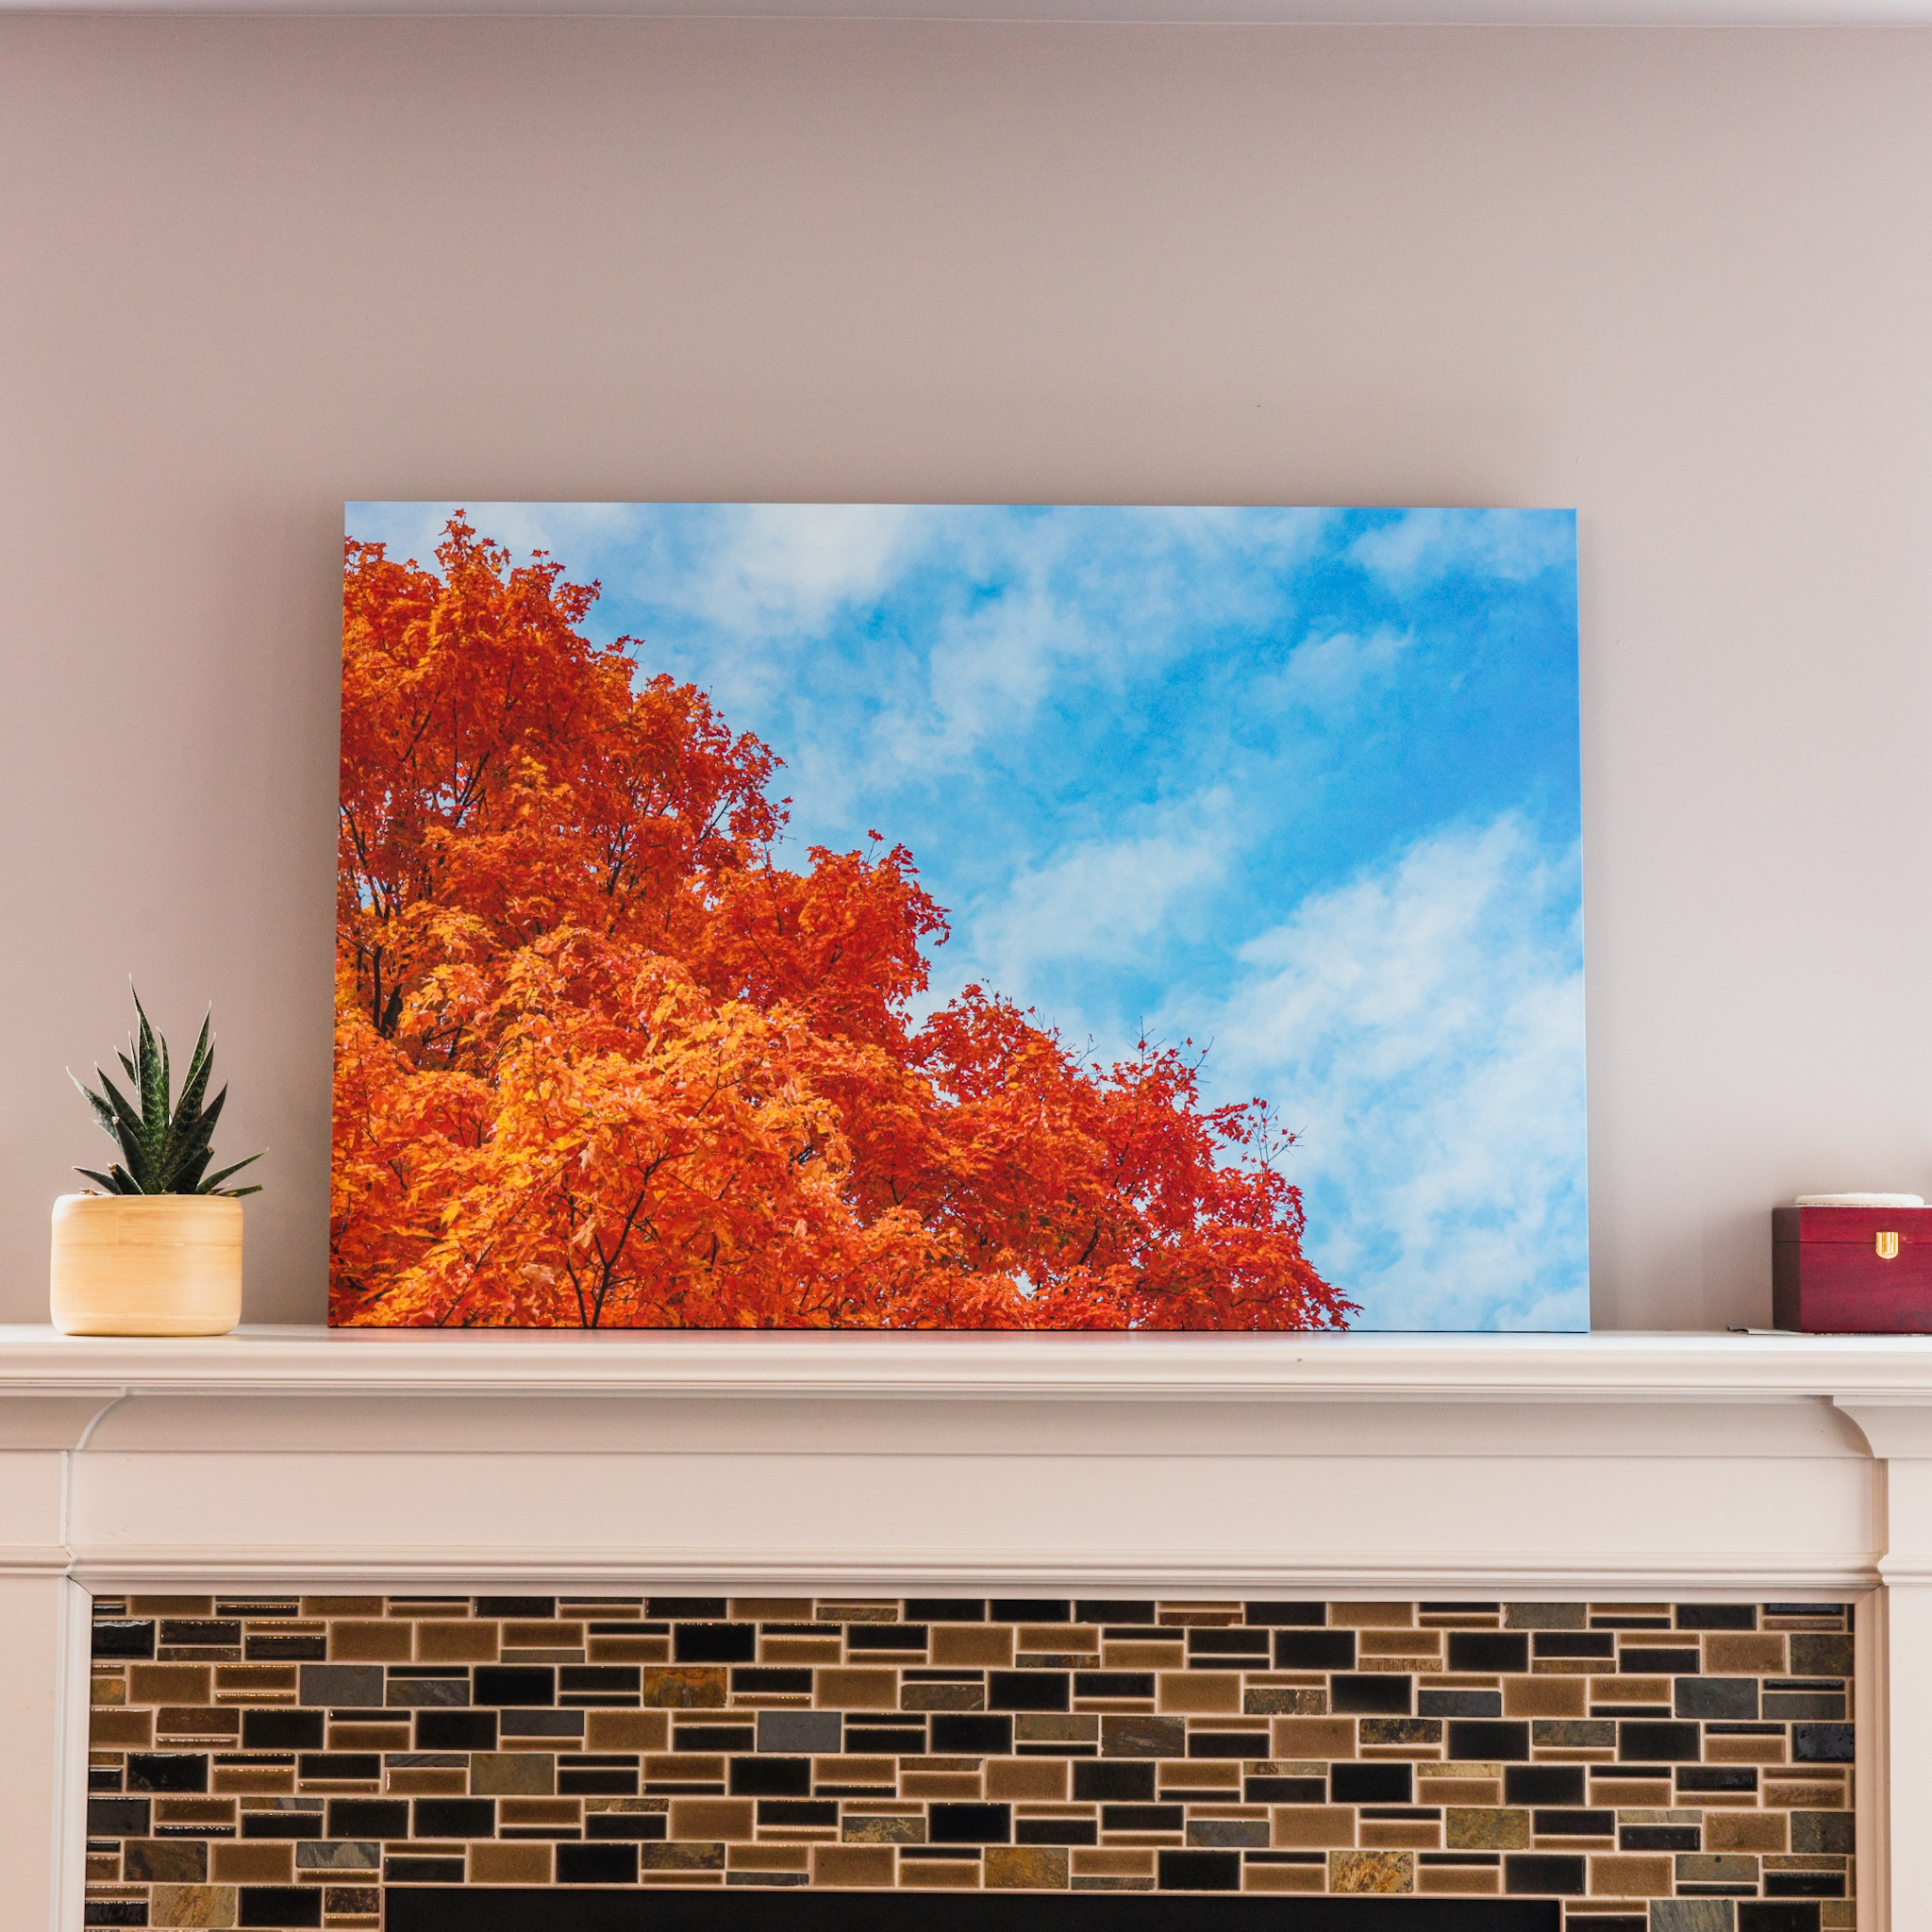 32”x48” Stretched Canvas - Autumn